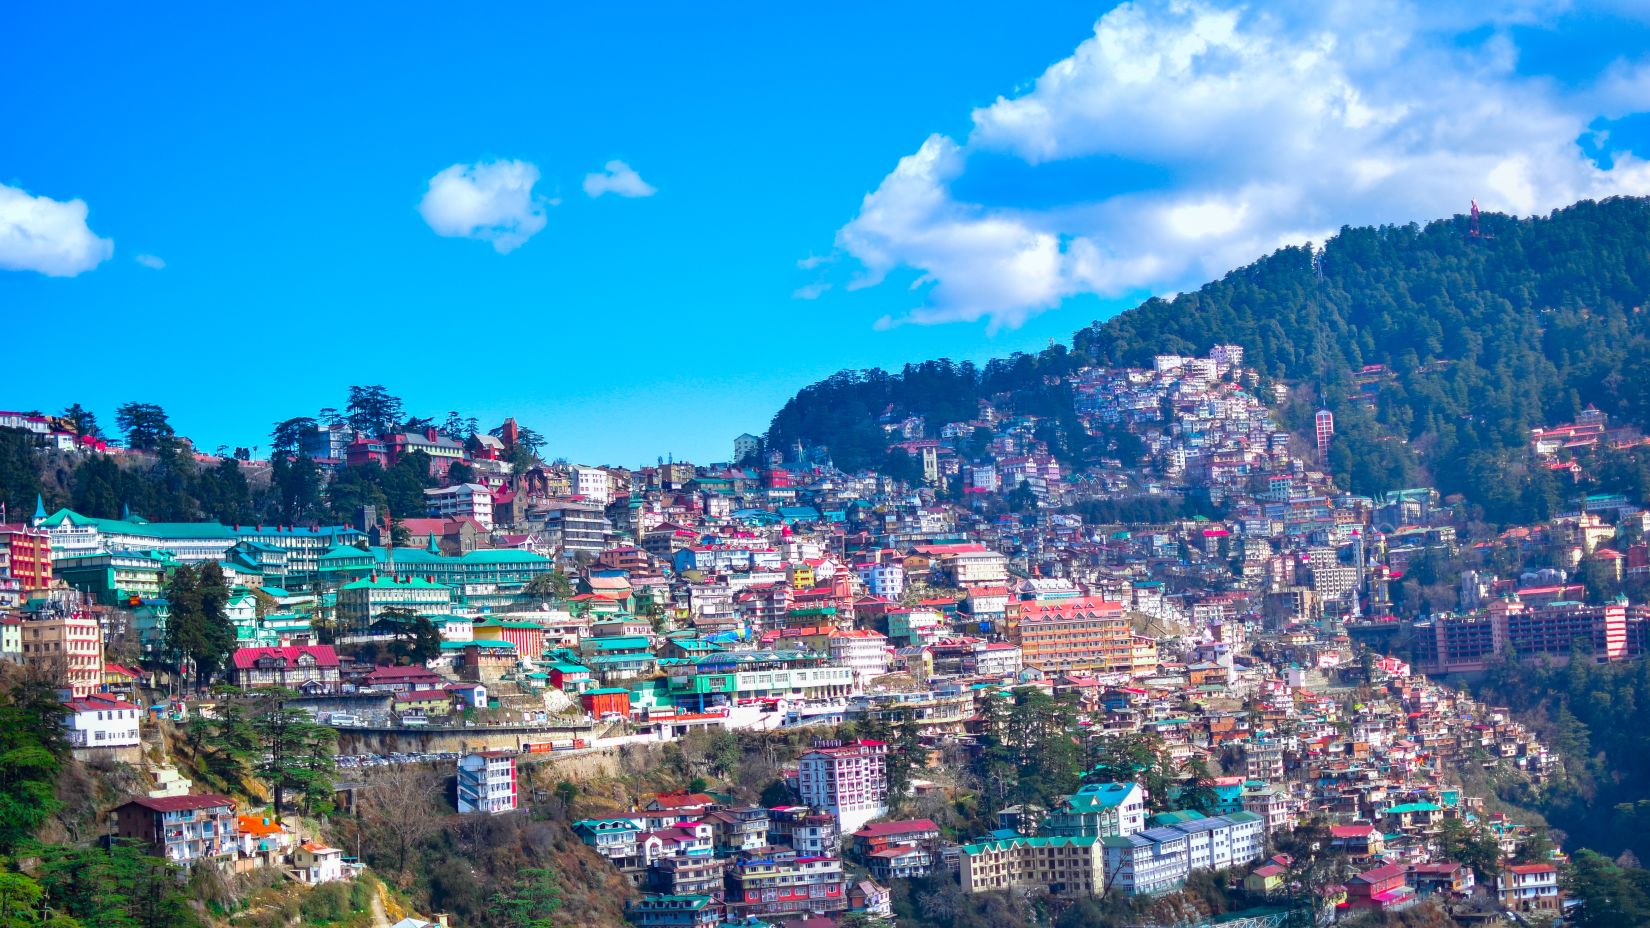 A far out view of the building on the hills of Shimla and the surrounding greenery